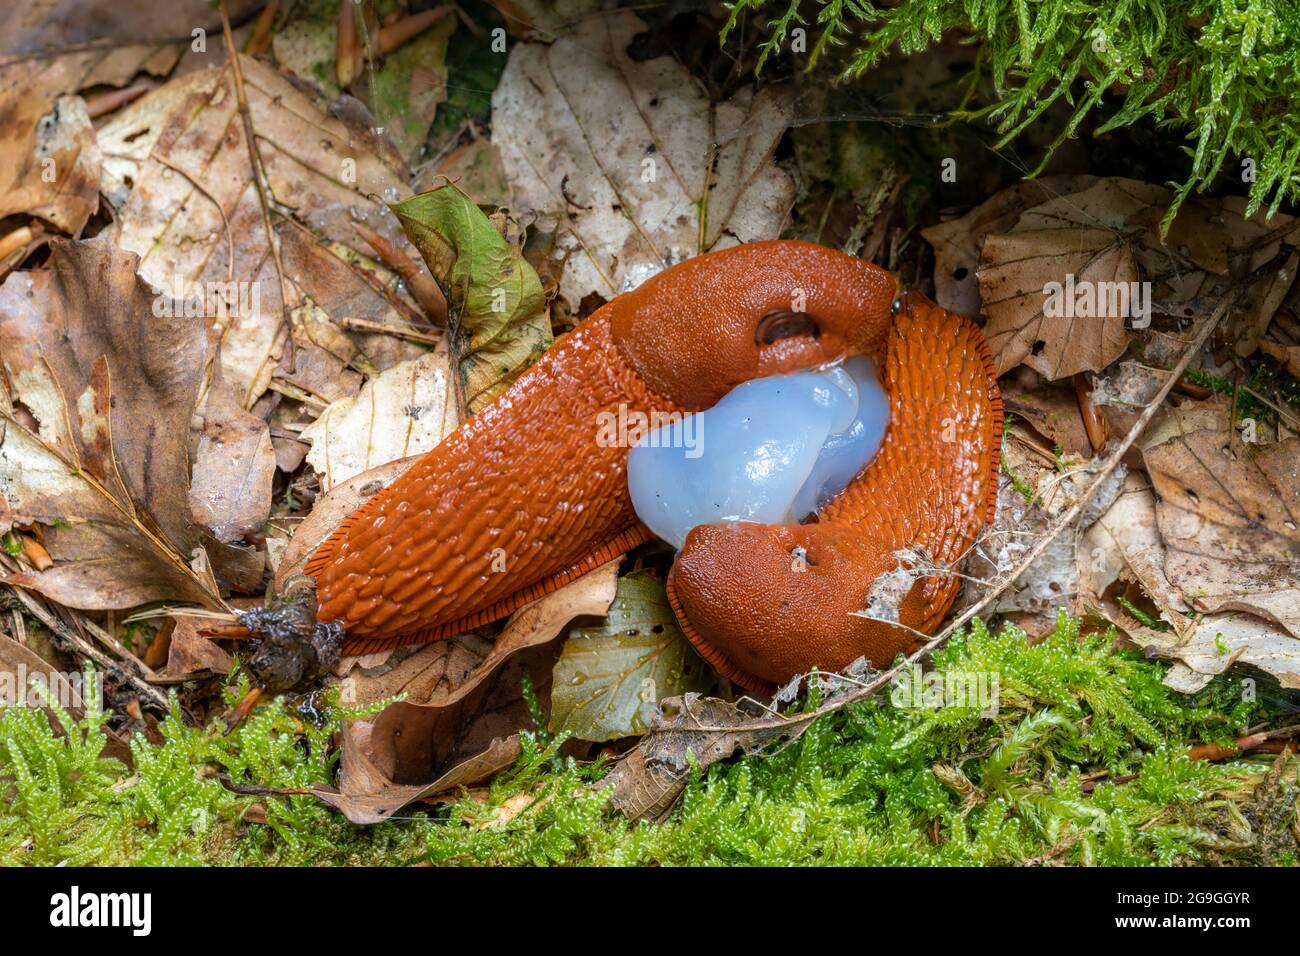 two red spanish slugs mating on the forest floor with leaves and moss Stock Photo